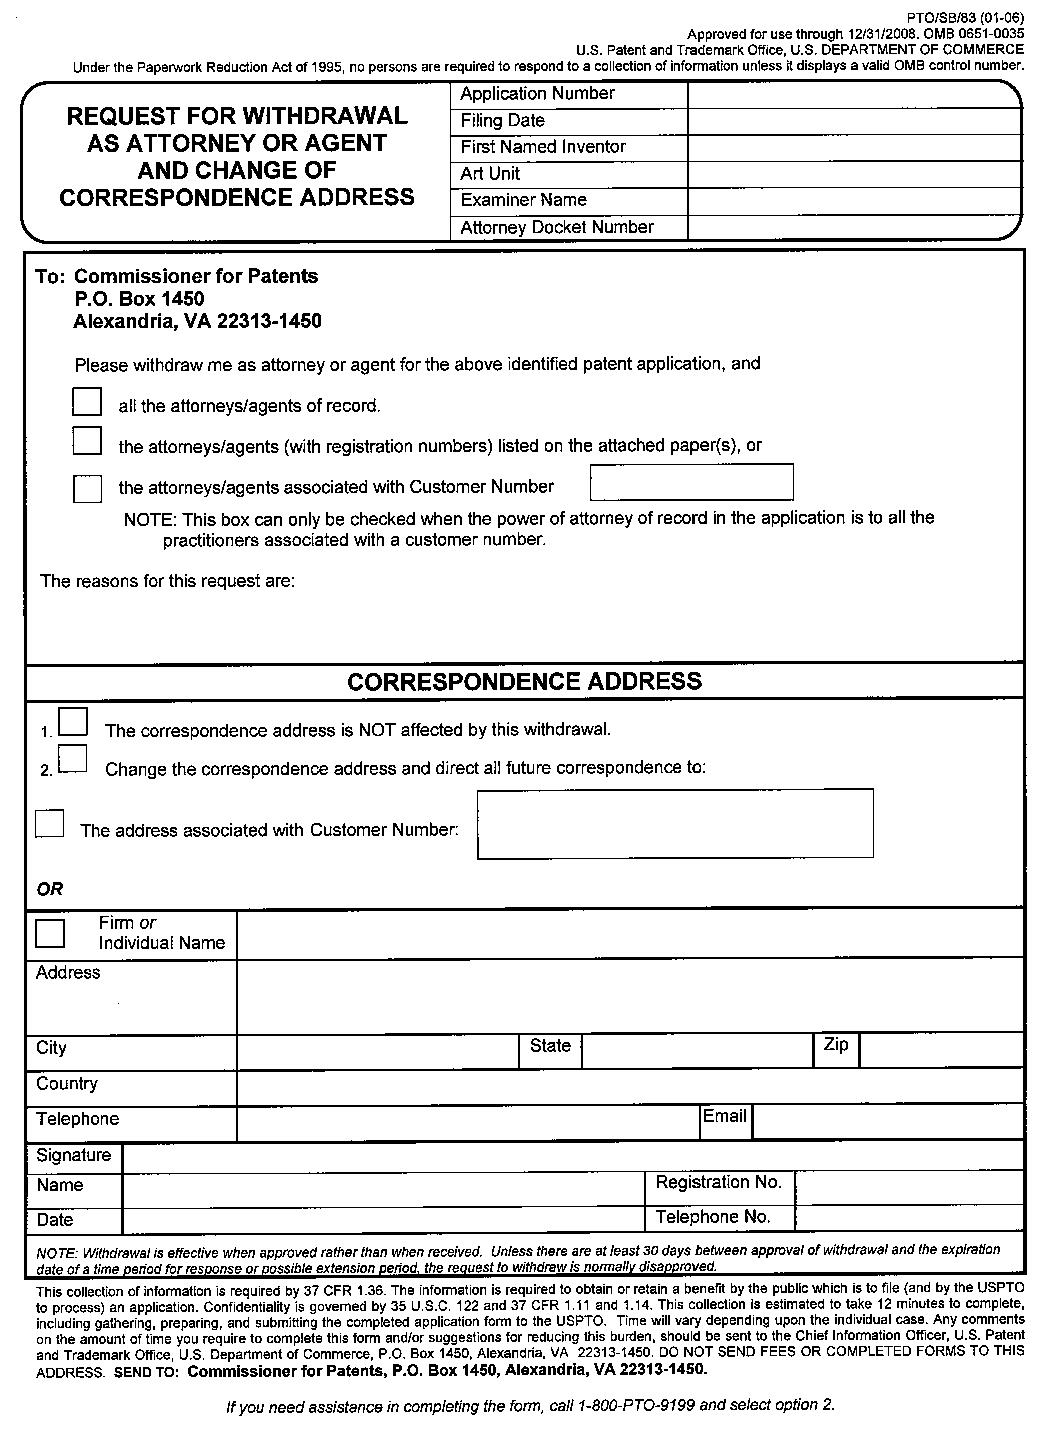 form pto/sb/83 request for withdrawal as attorney or agent and change of correspondence address